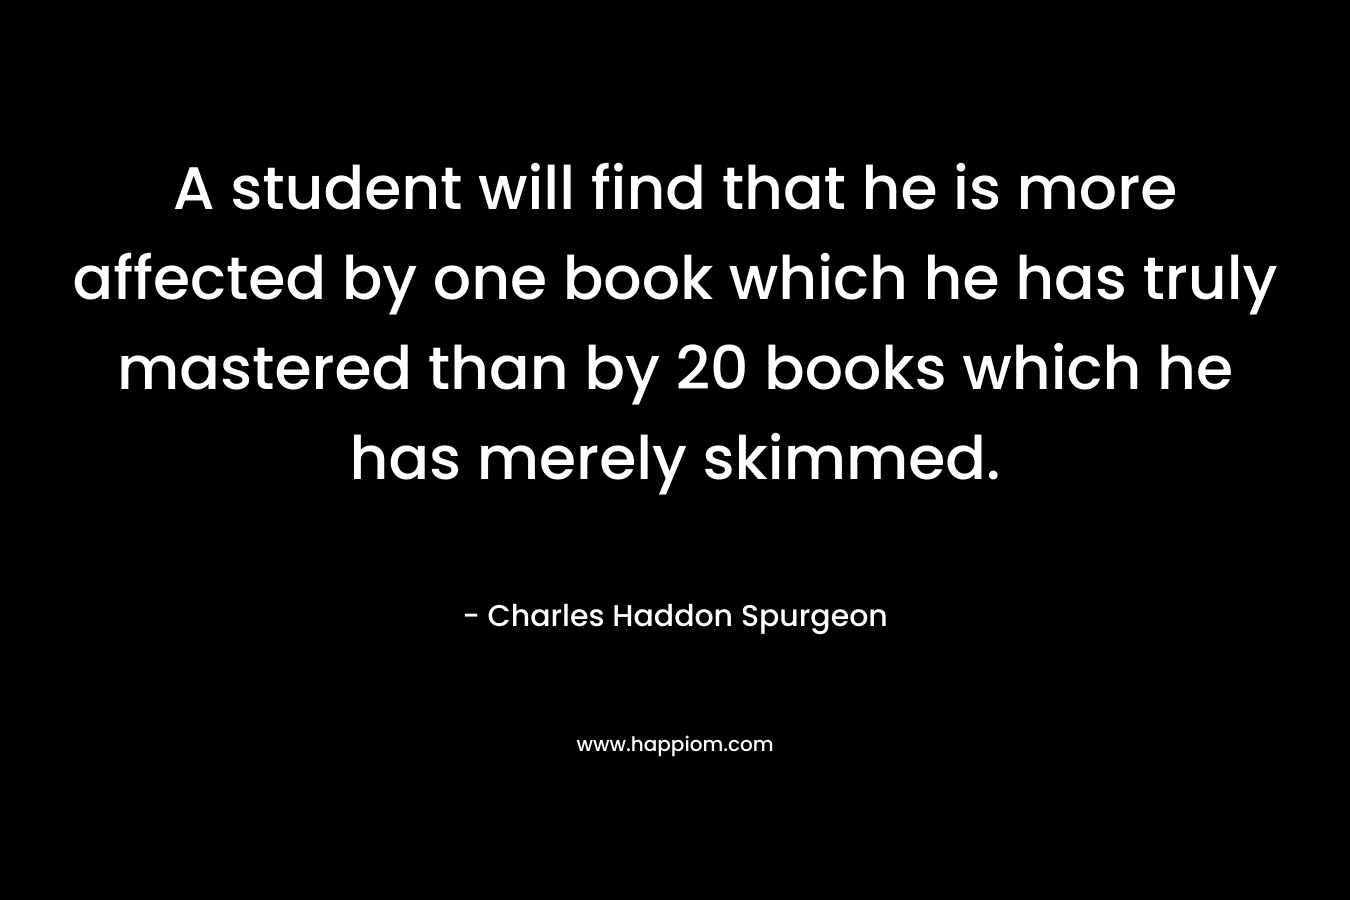 A student will find that he is more affected by one book which he has truly mastered than by 20 books which he has merely skimmed. – Charles Haddon Spurgeon